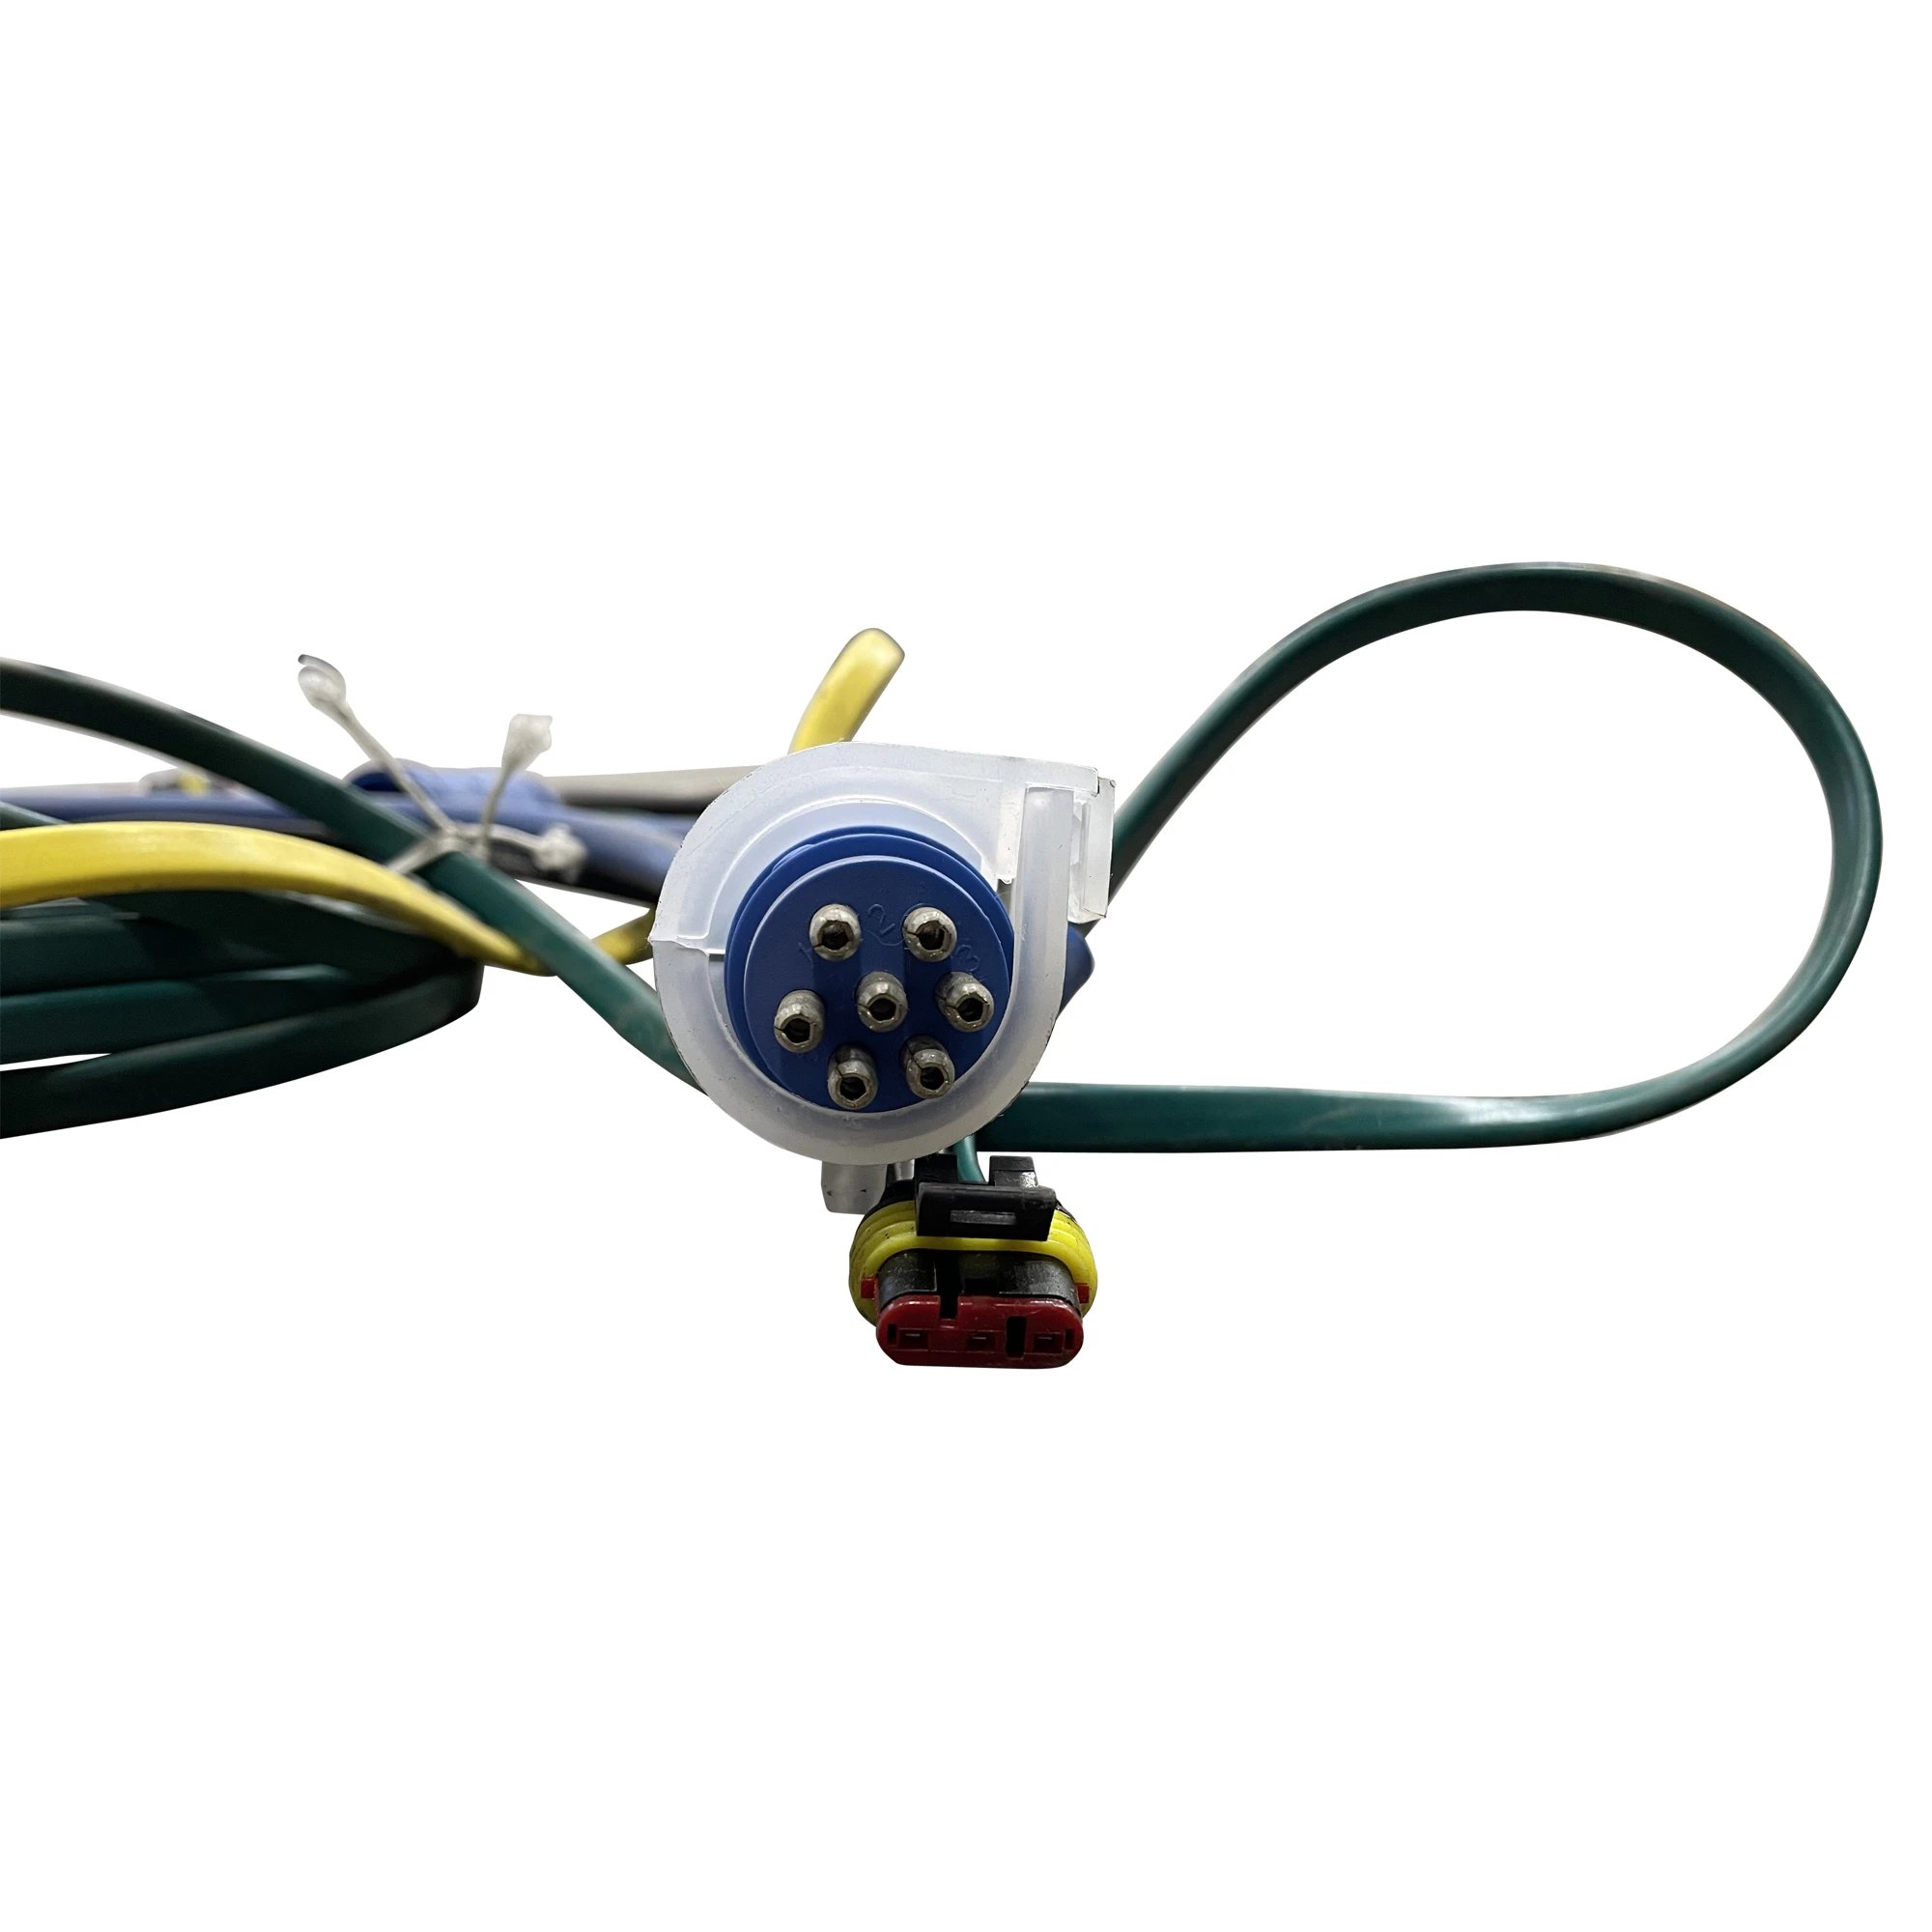 Galbreath™ Wiring Harness Grote LED 7 Pin